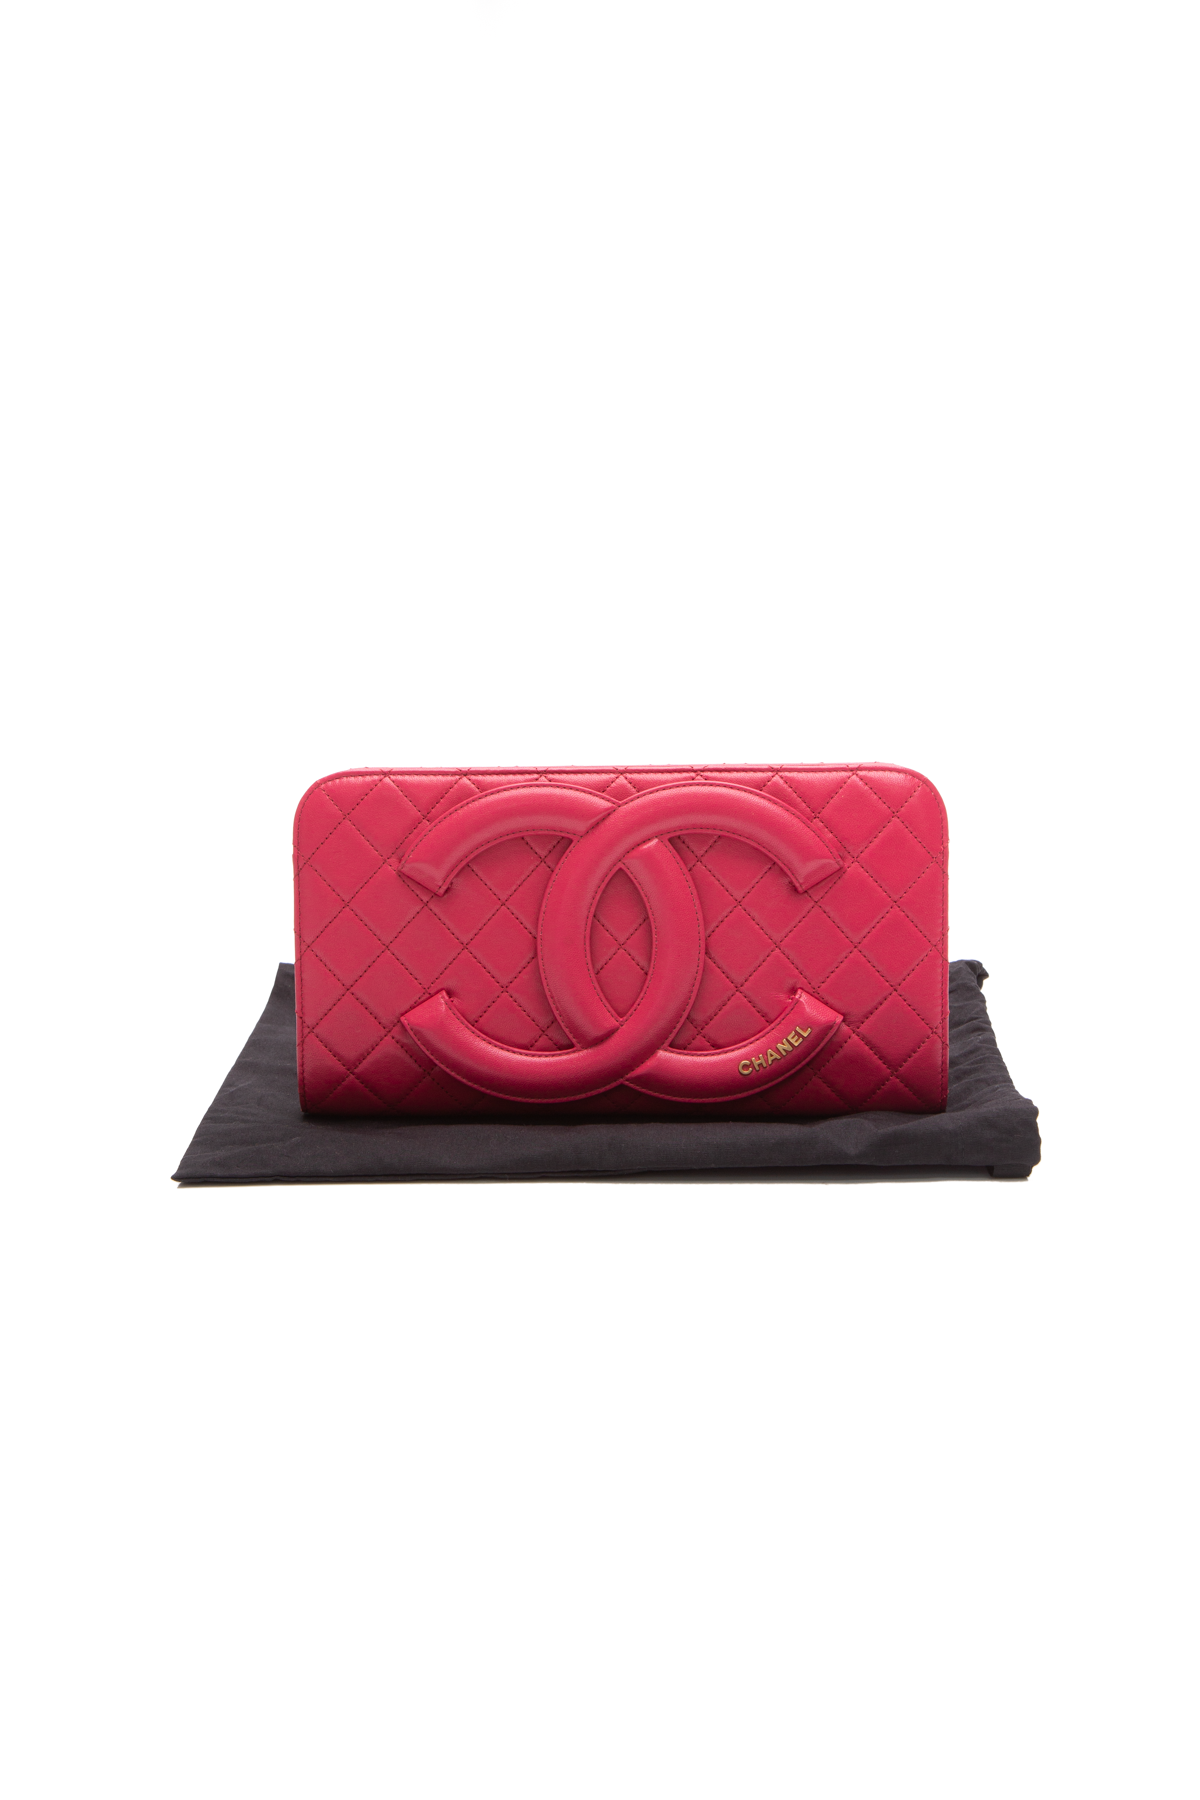 Chanel Coco Midnight Clutch - Couture USA